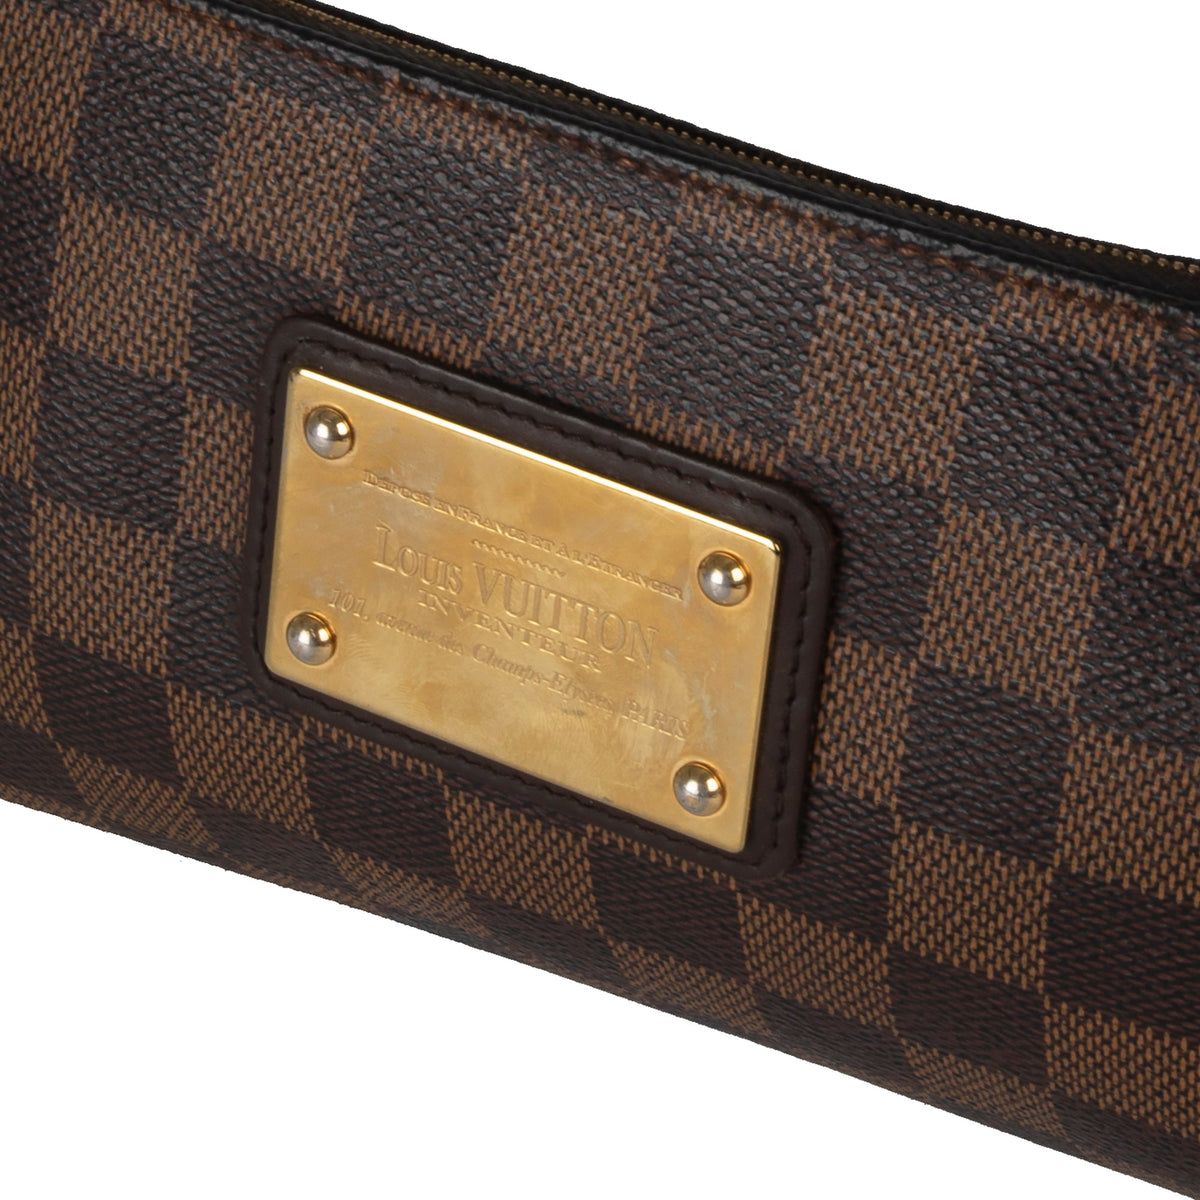 We'll help you find the Louis Vuitton Damier Ebene Eva Clutch w/ Strap Louis  Vuitton suitable for you with our expert staff